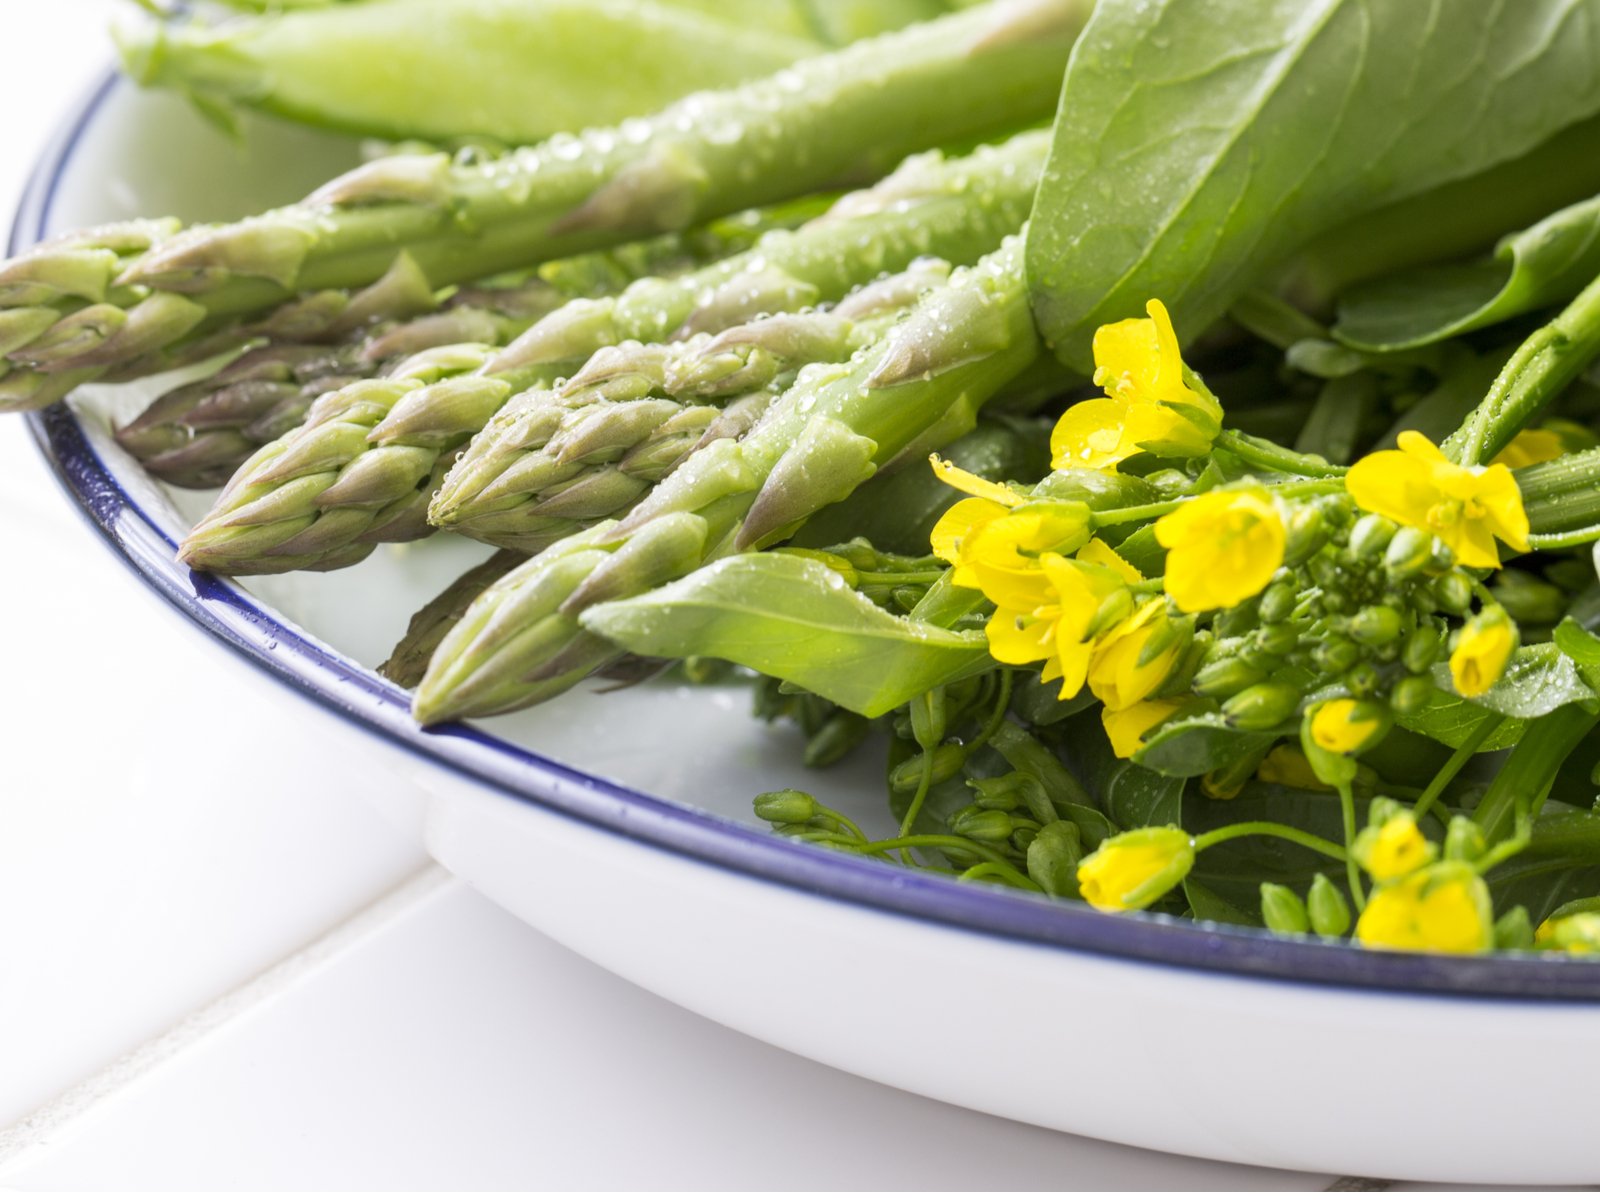 Vegetables to put some spring on your plate.